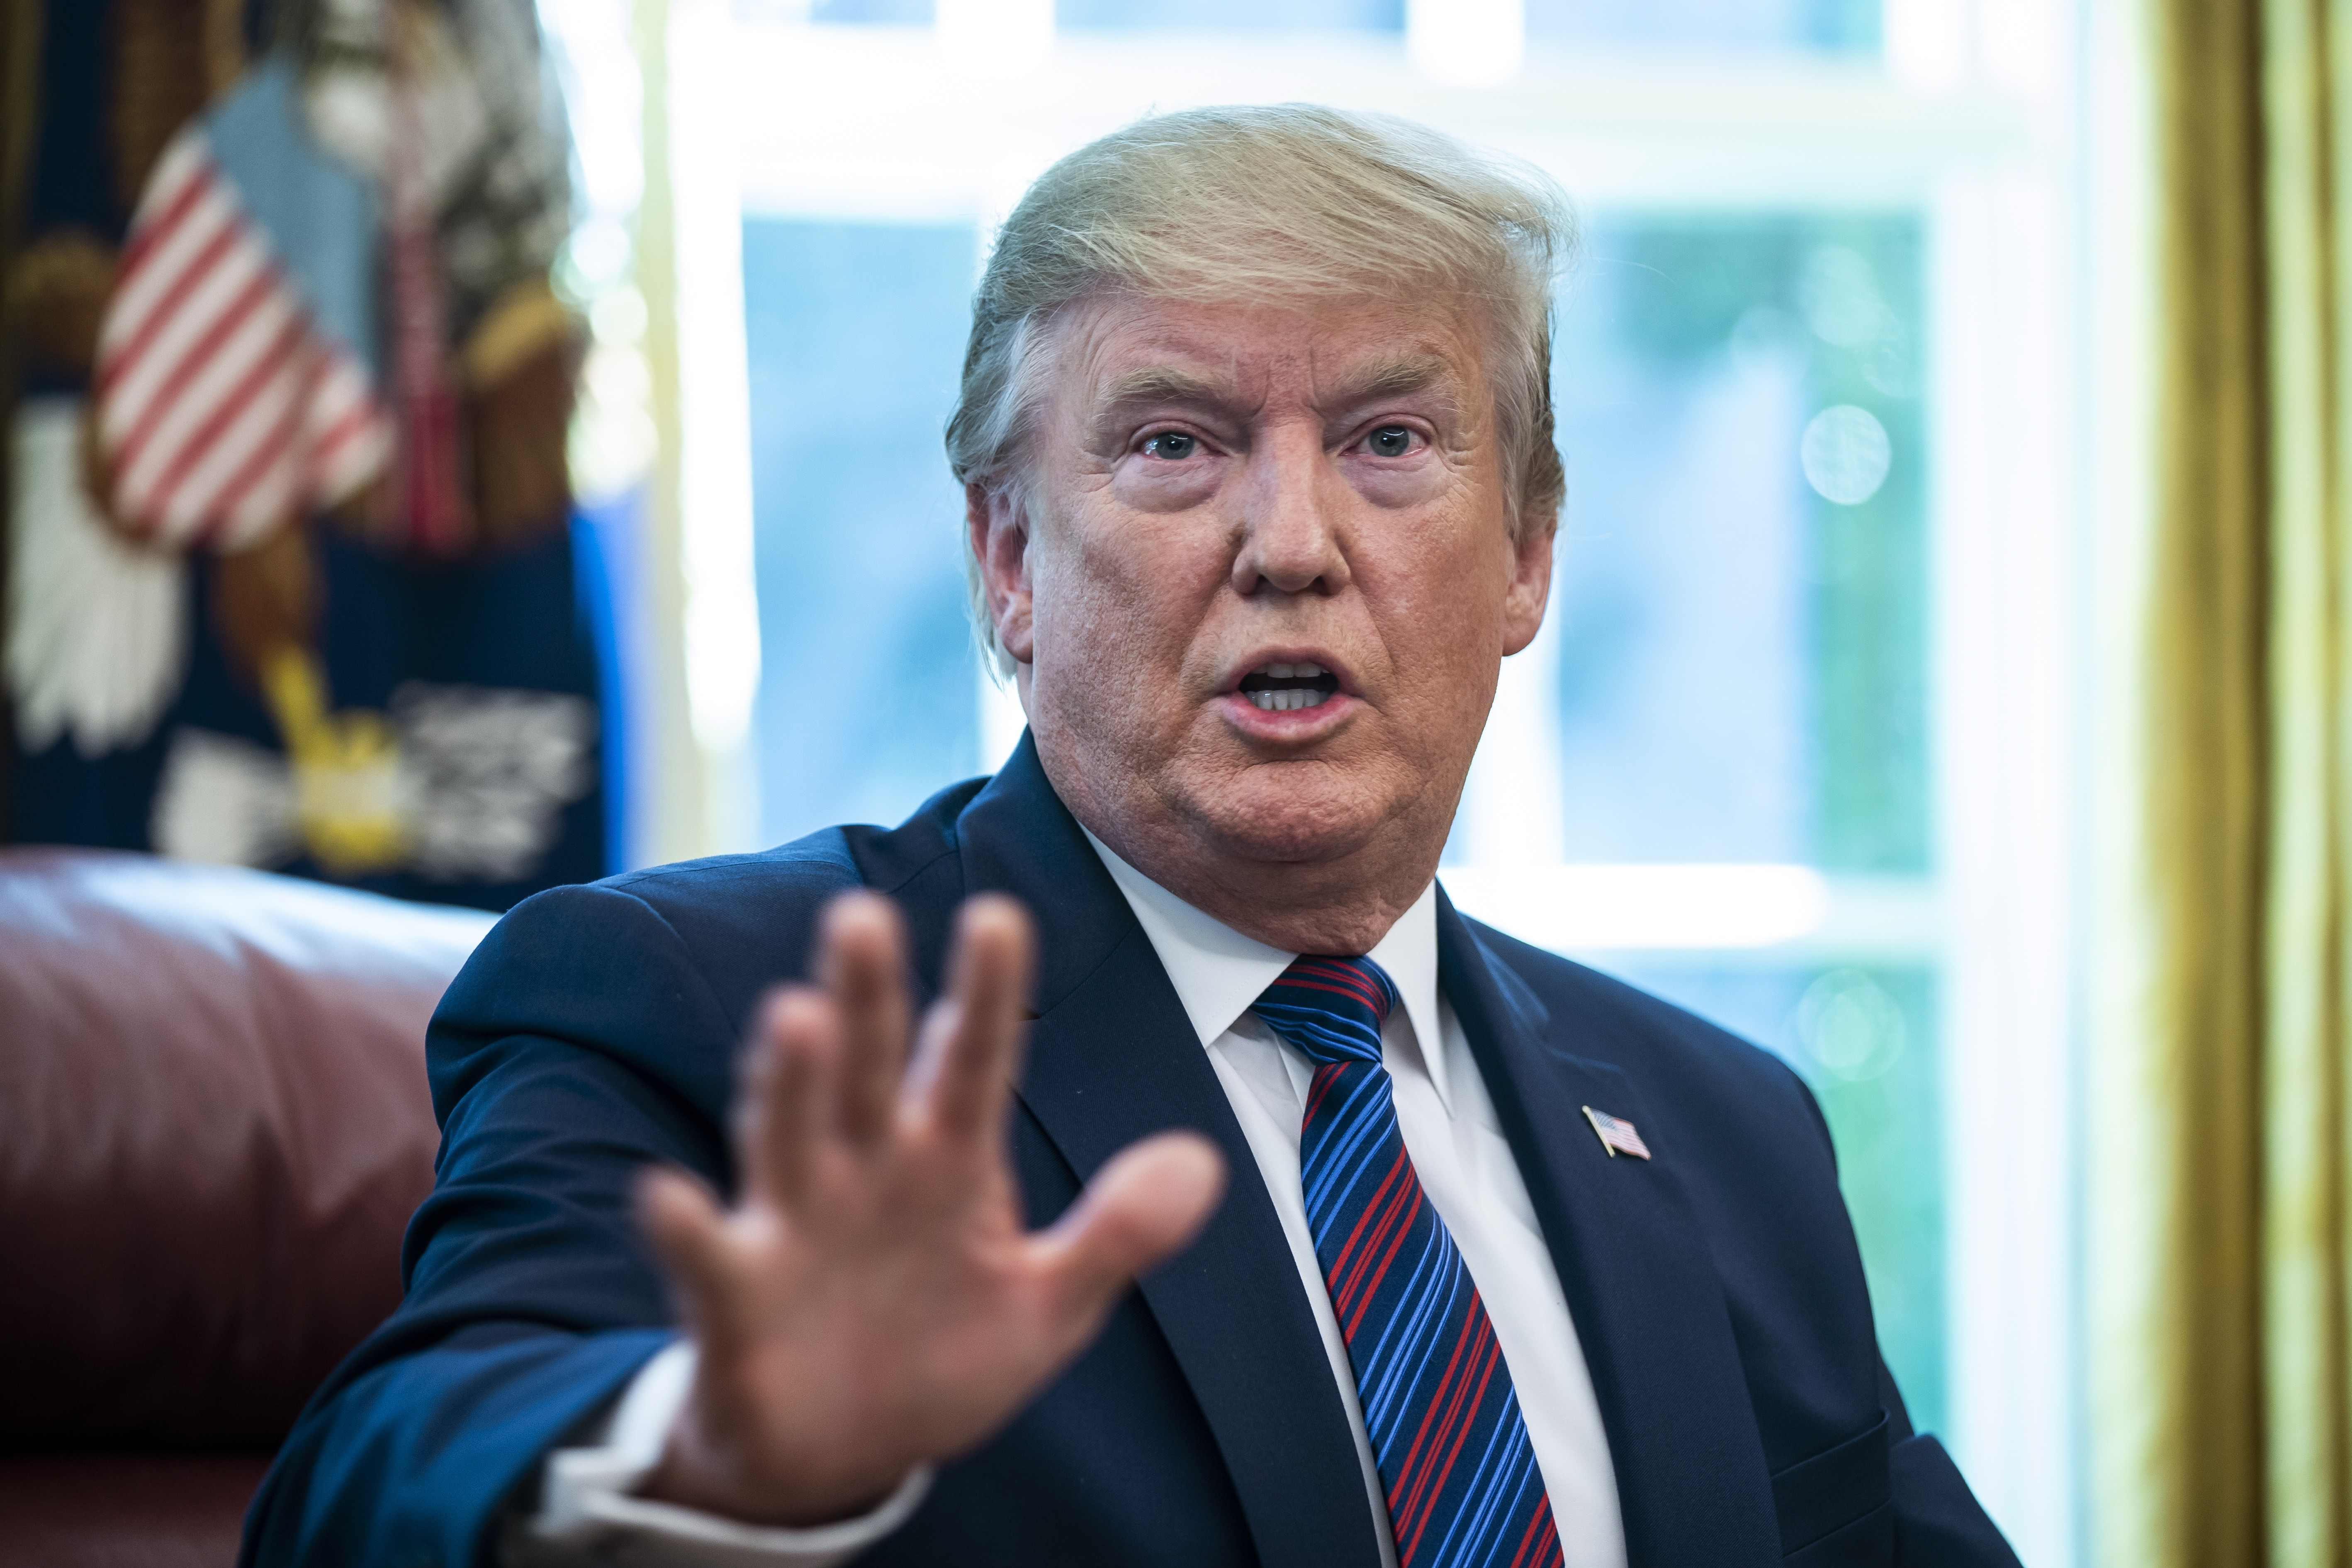 US President Donald Trump says the developing country designation lets China and others take “unfair” advantage of trade rules. Photo: EPA-EFE